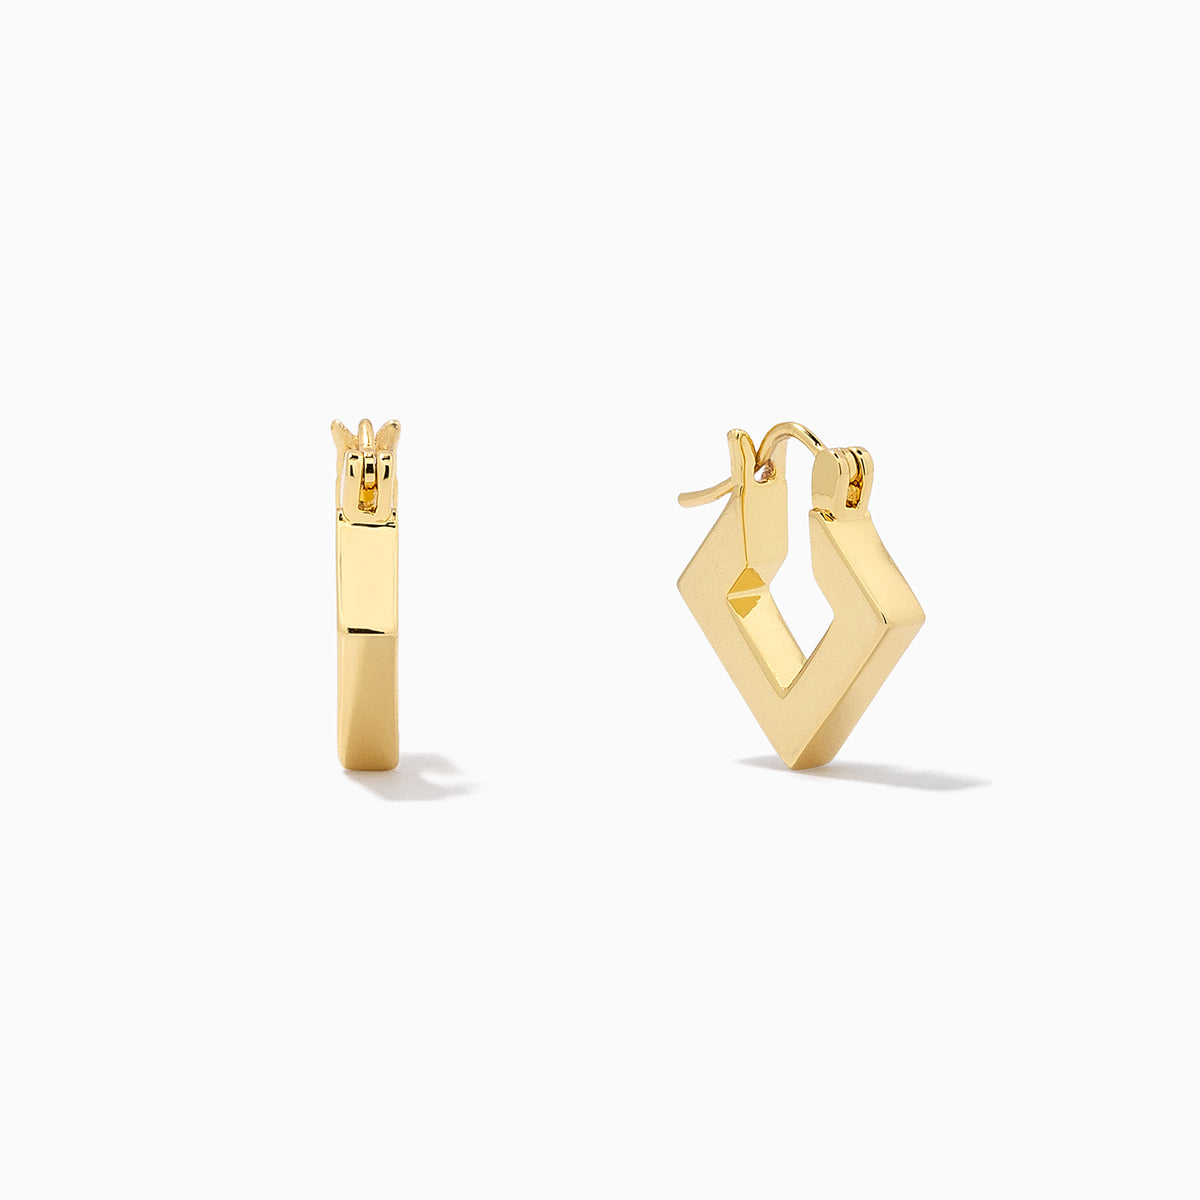 Breaking Point Earrings | Gold | Product Image | Uncommon James